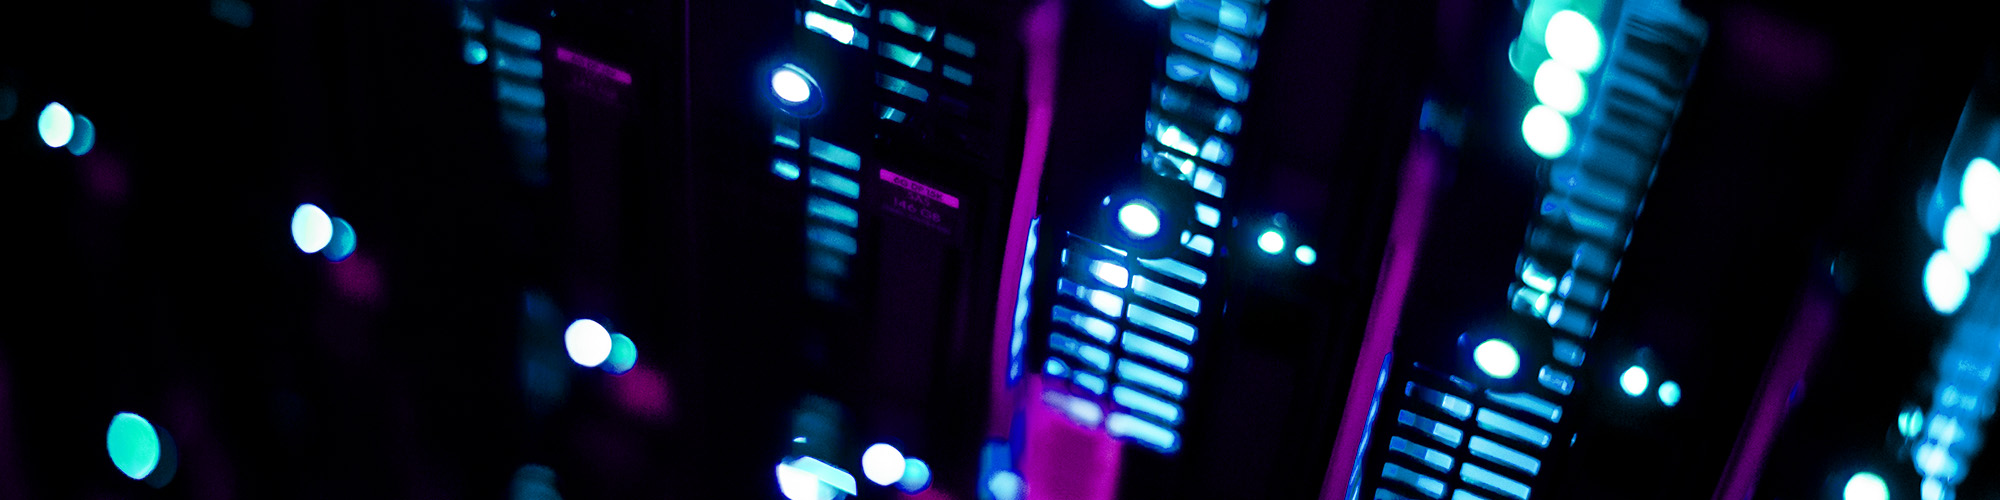 Closeup and blurred computer parts glowing in the dark.